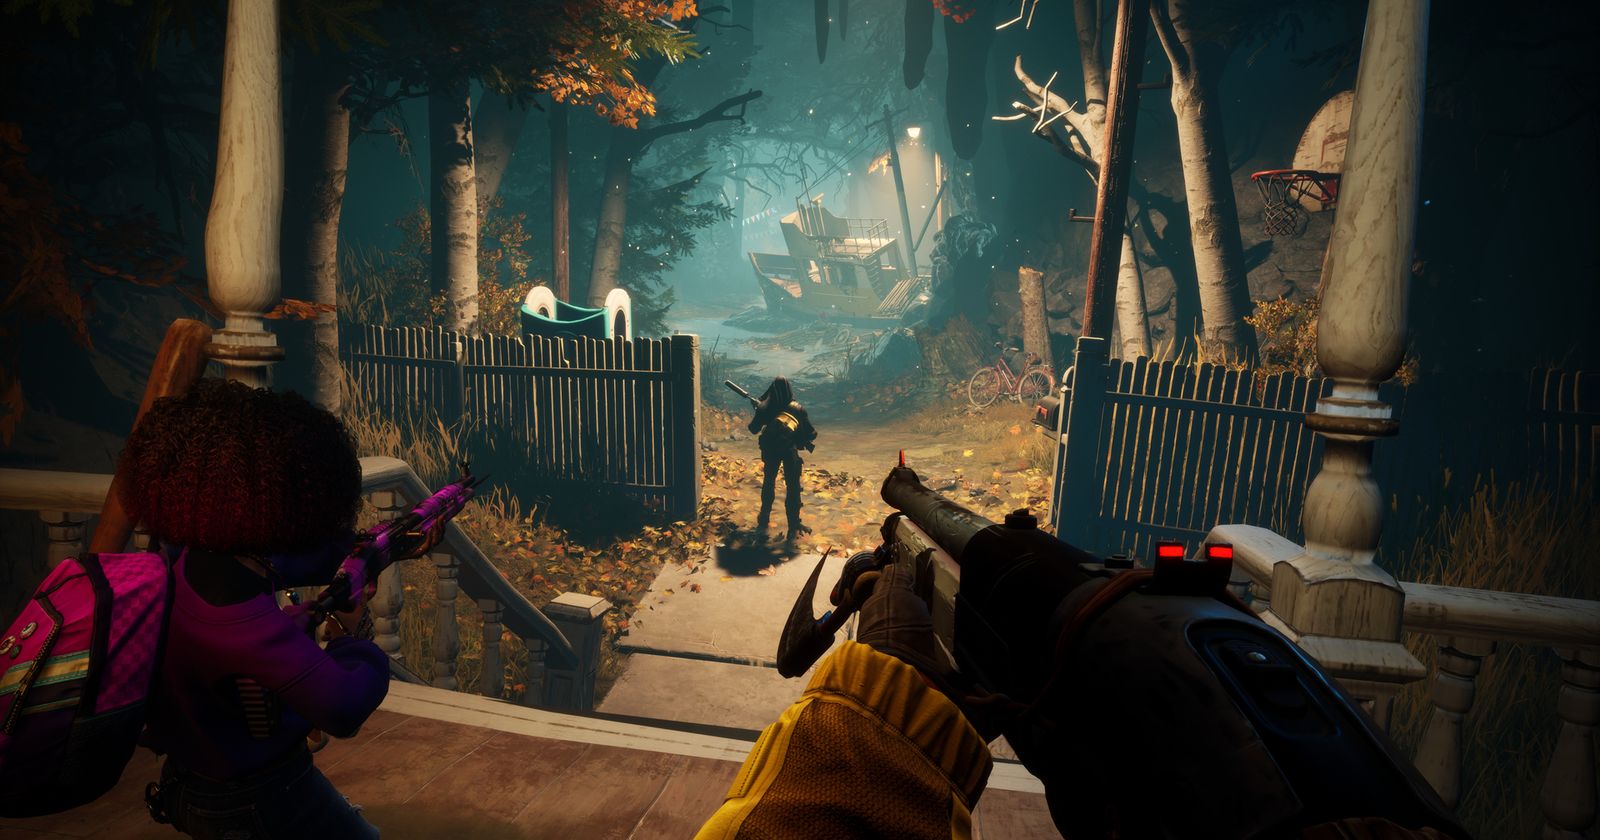 Redfall' will still emphasise the solo experience despite co-op features